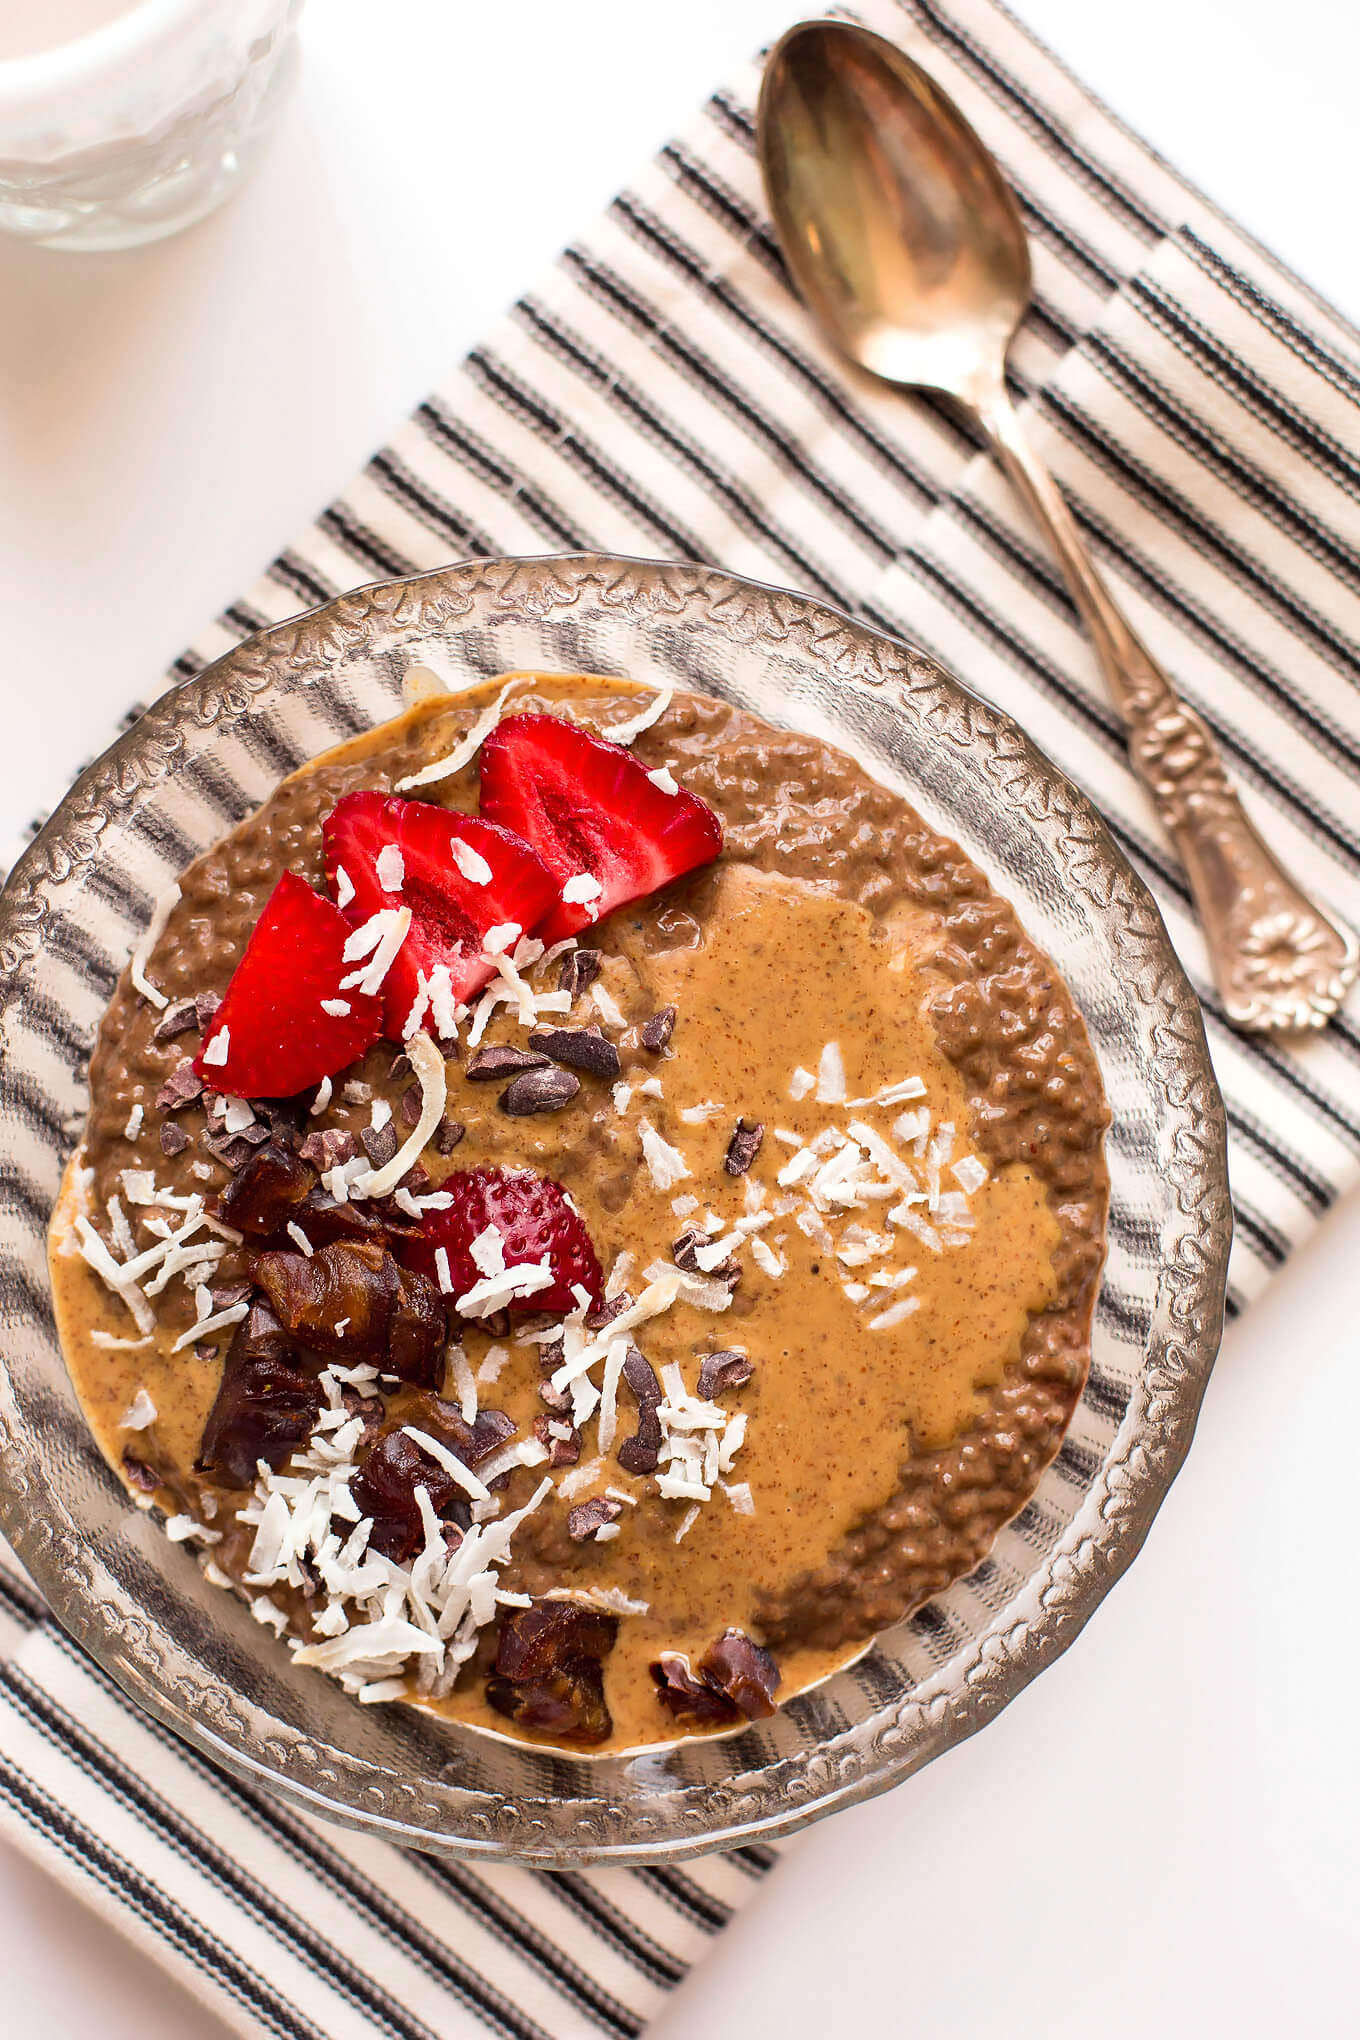 Secretly Green Almond Butter Chocolate Chia Pudding